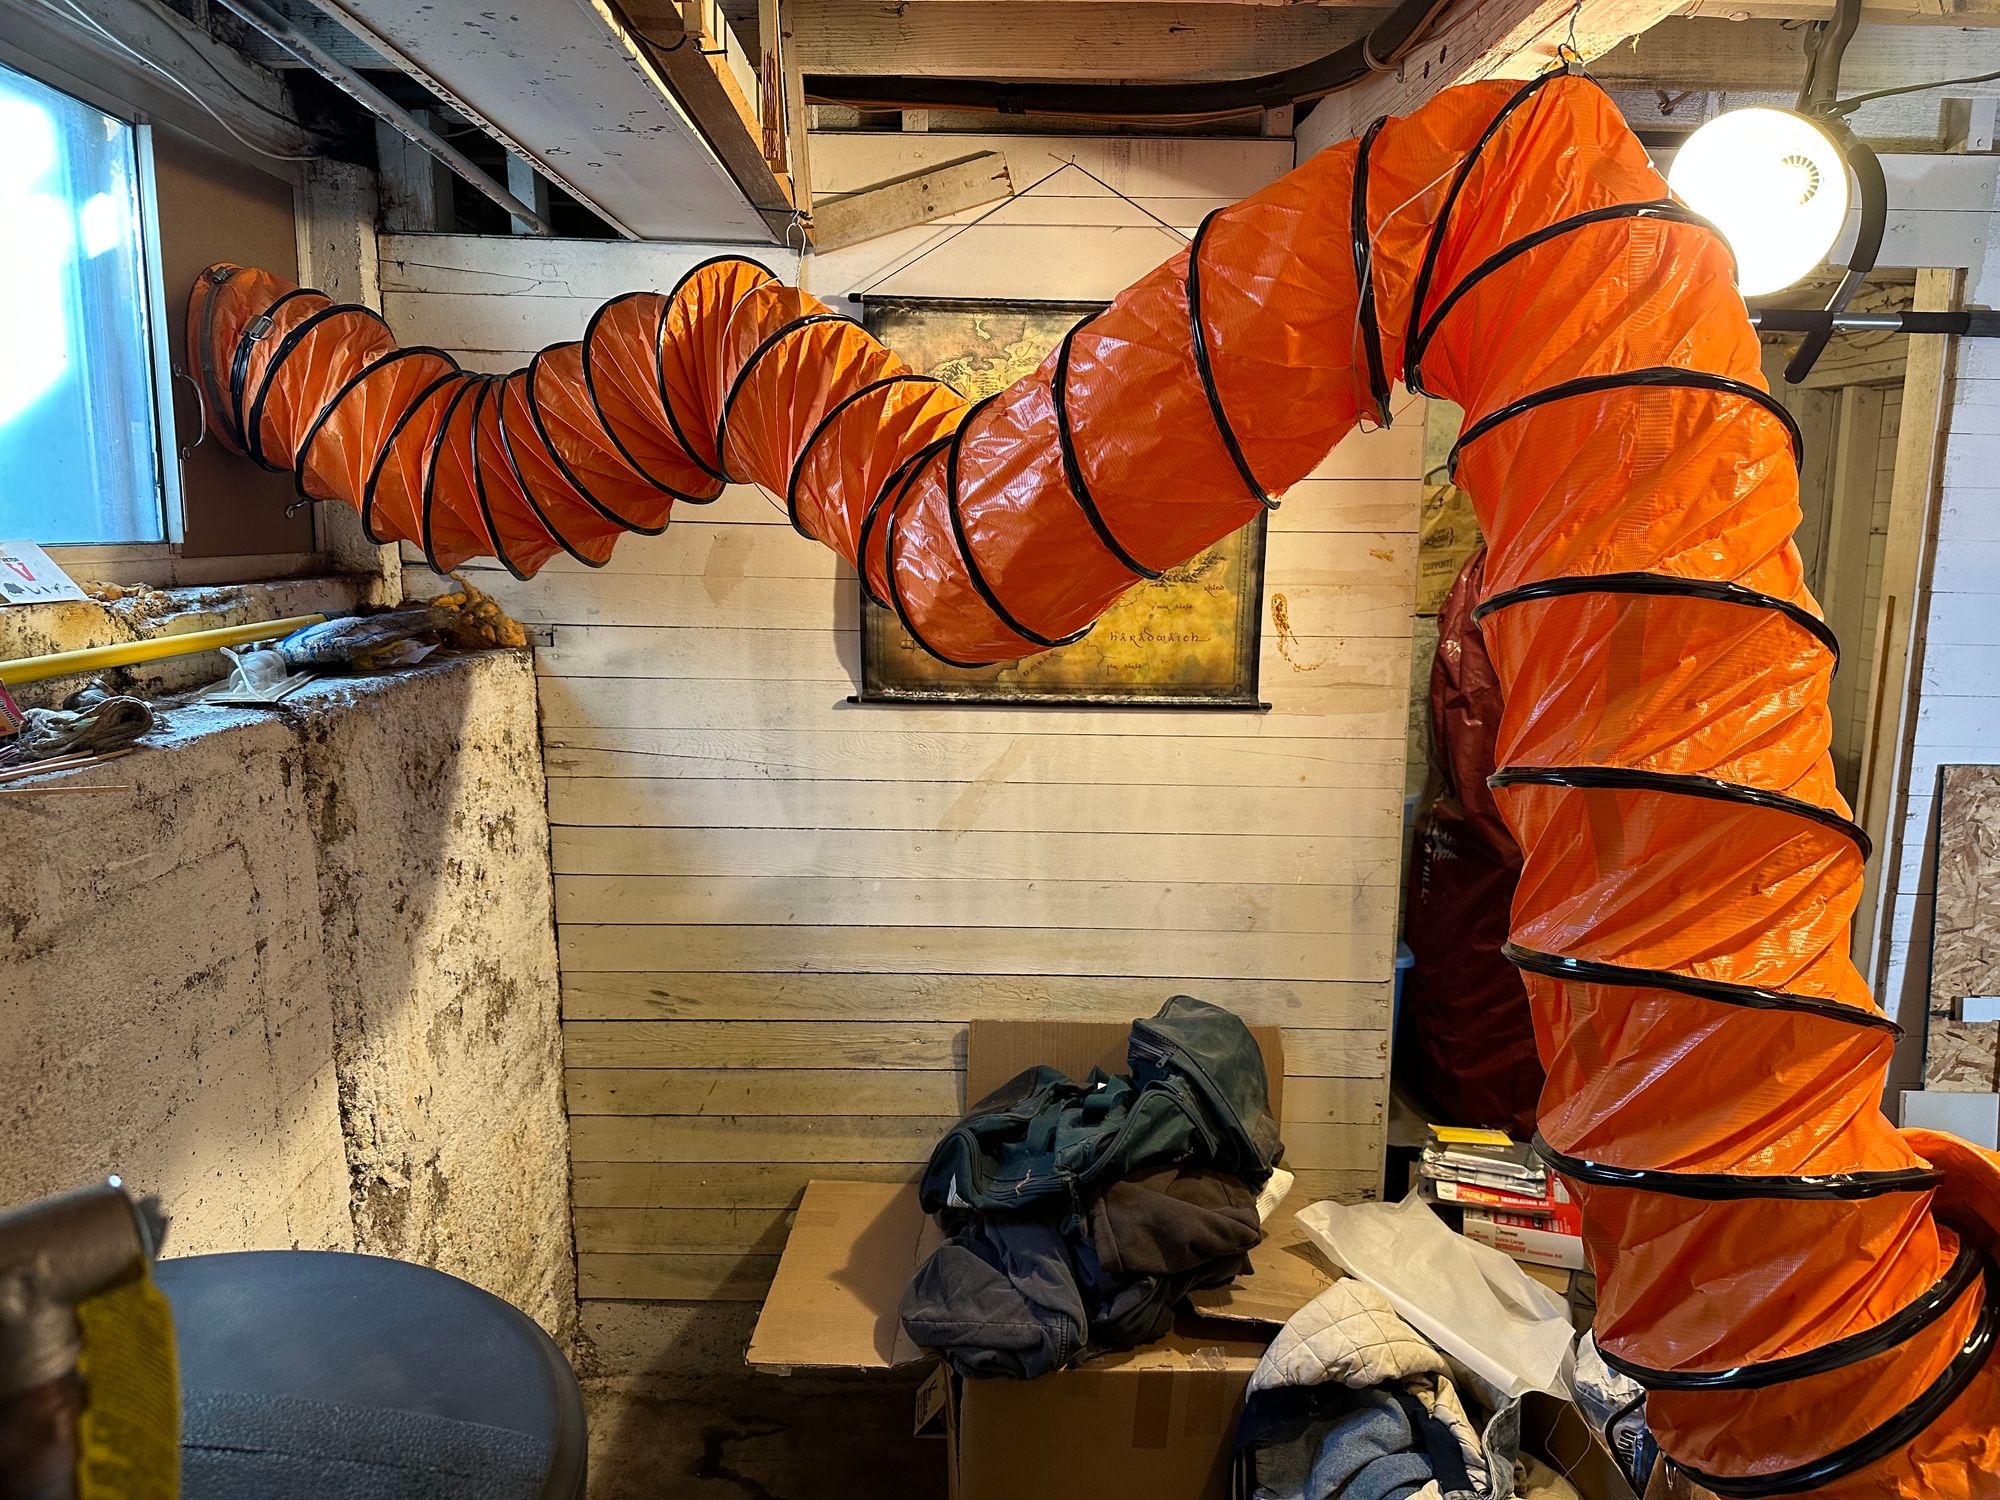 An orange ducting hose, which is suspended in two places between the blower and the window. A messy basement is seen in the background.